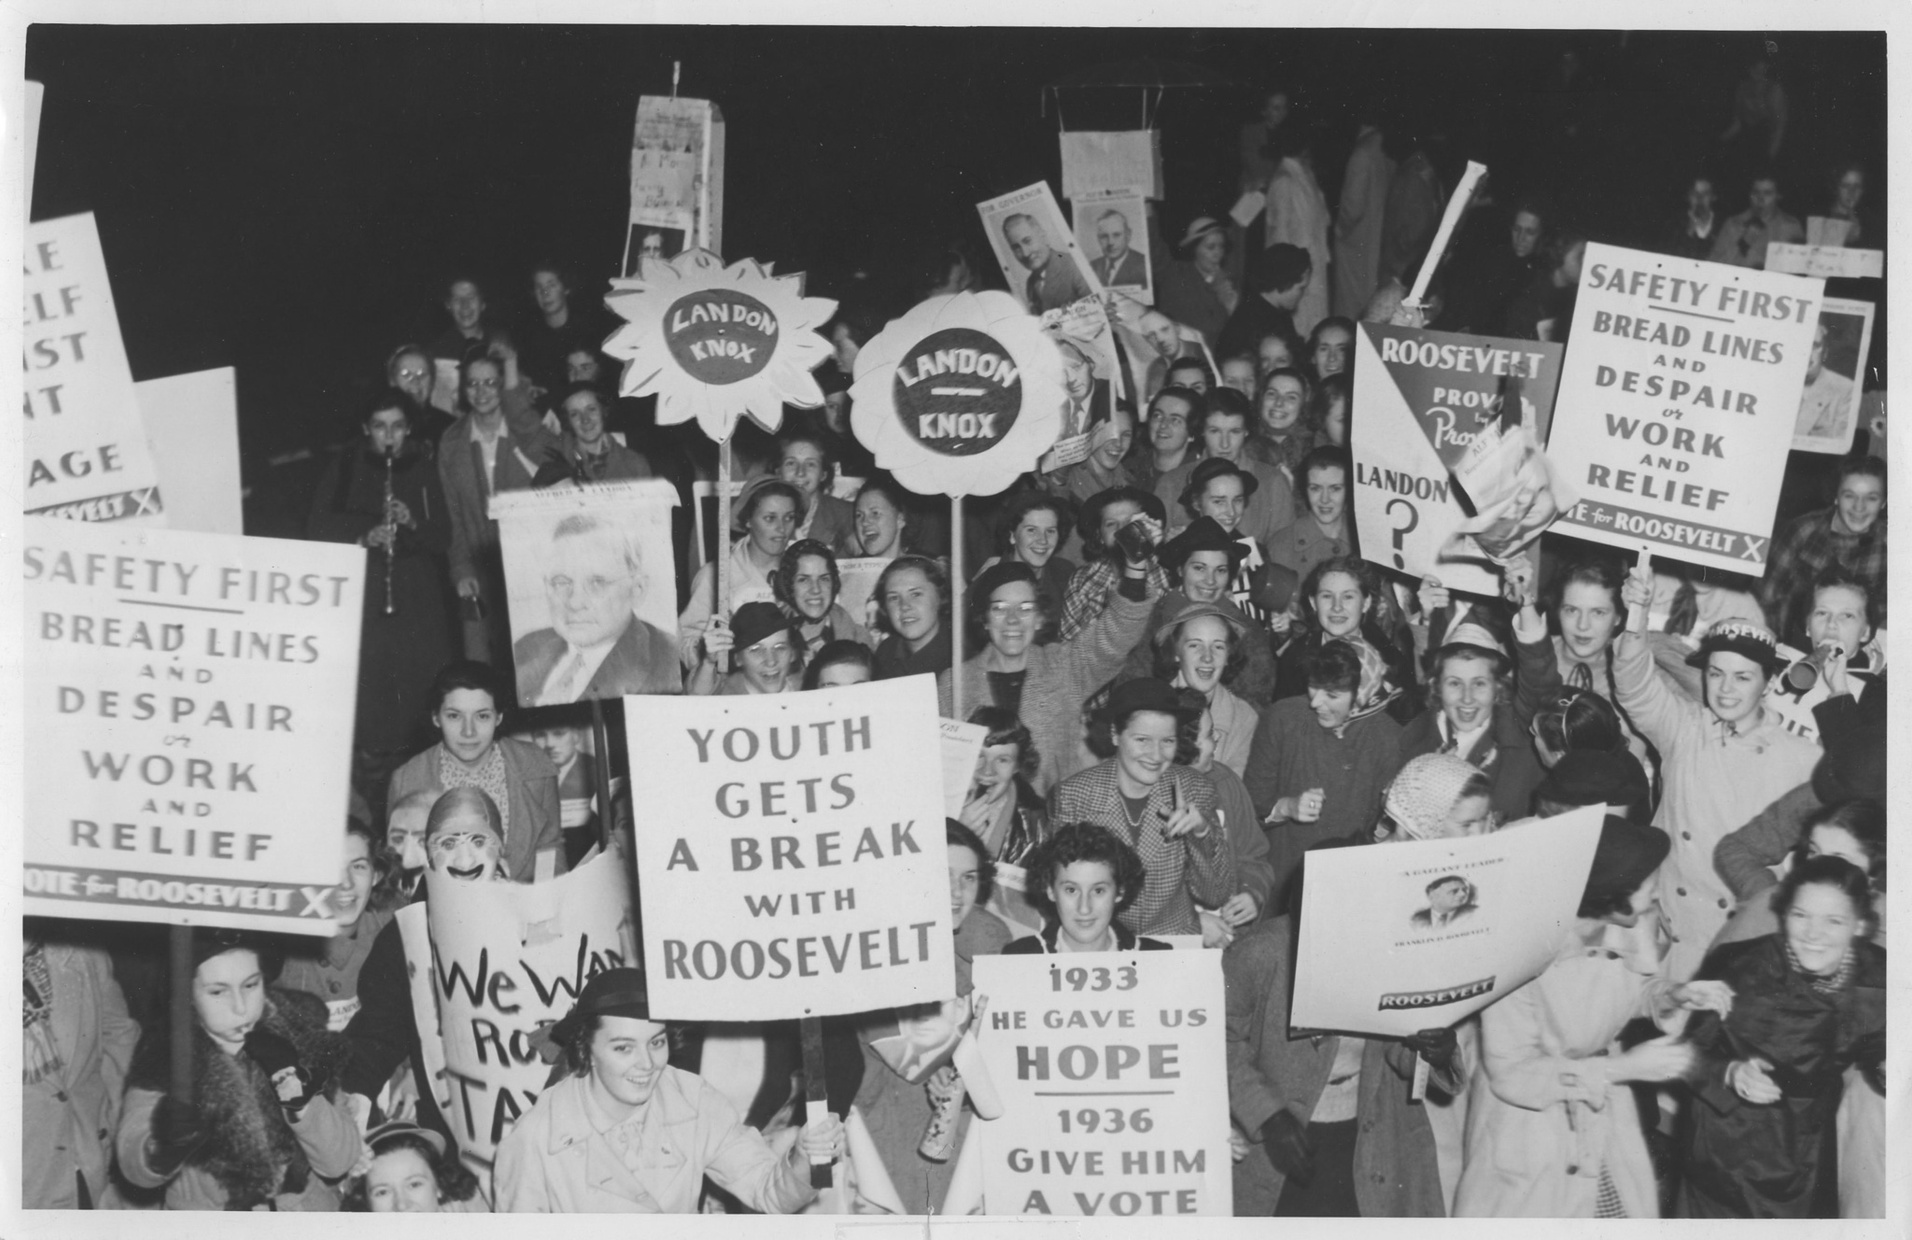 A black and white photograph depicts a crowd of light-skinned young women who are smiling and holding signs in support of Franklin D. Roosevelt and Alf Landon.